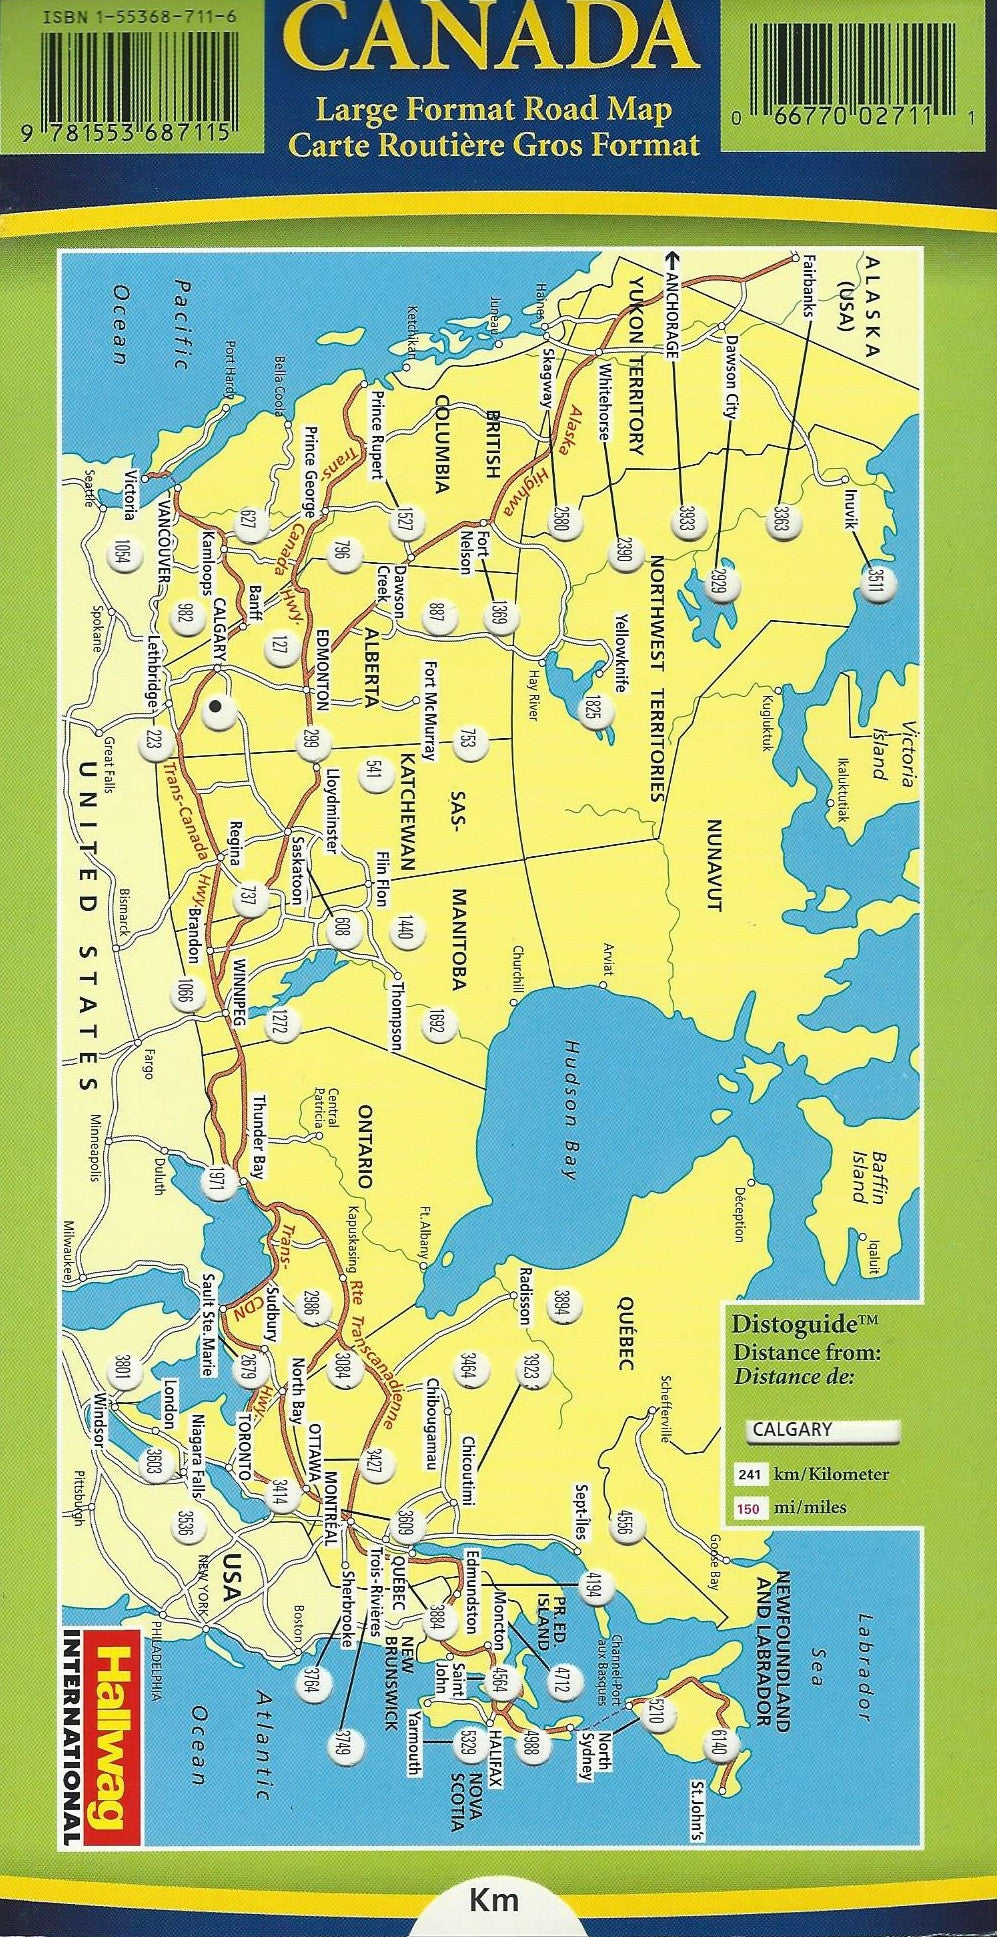 Canada Large Format Road Map